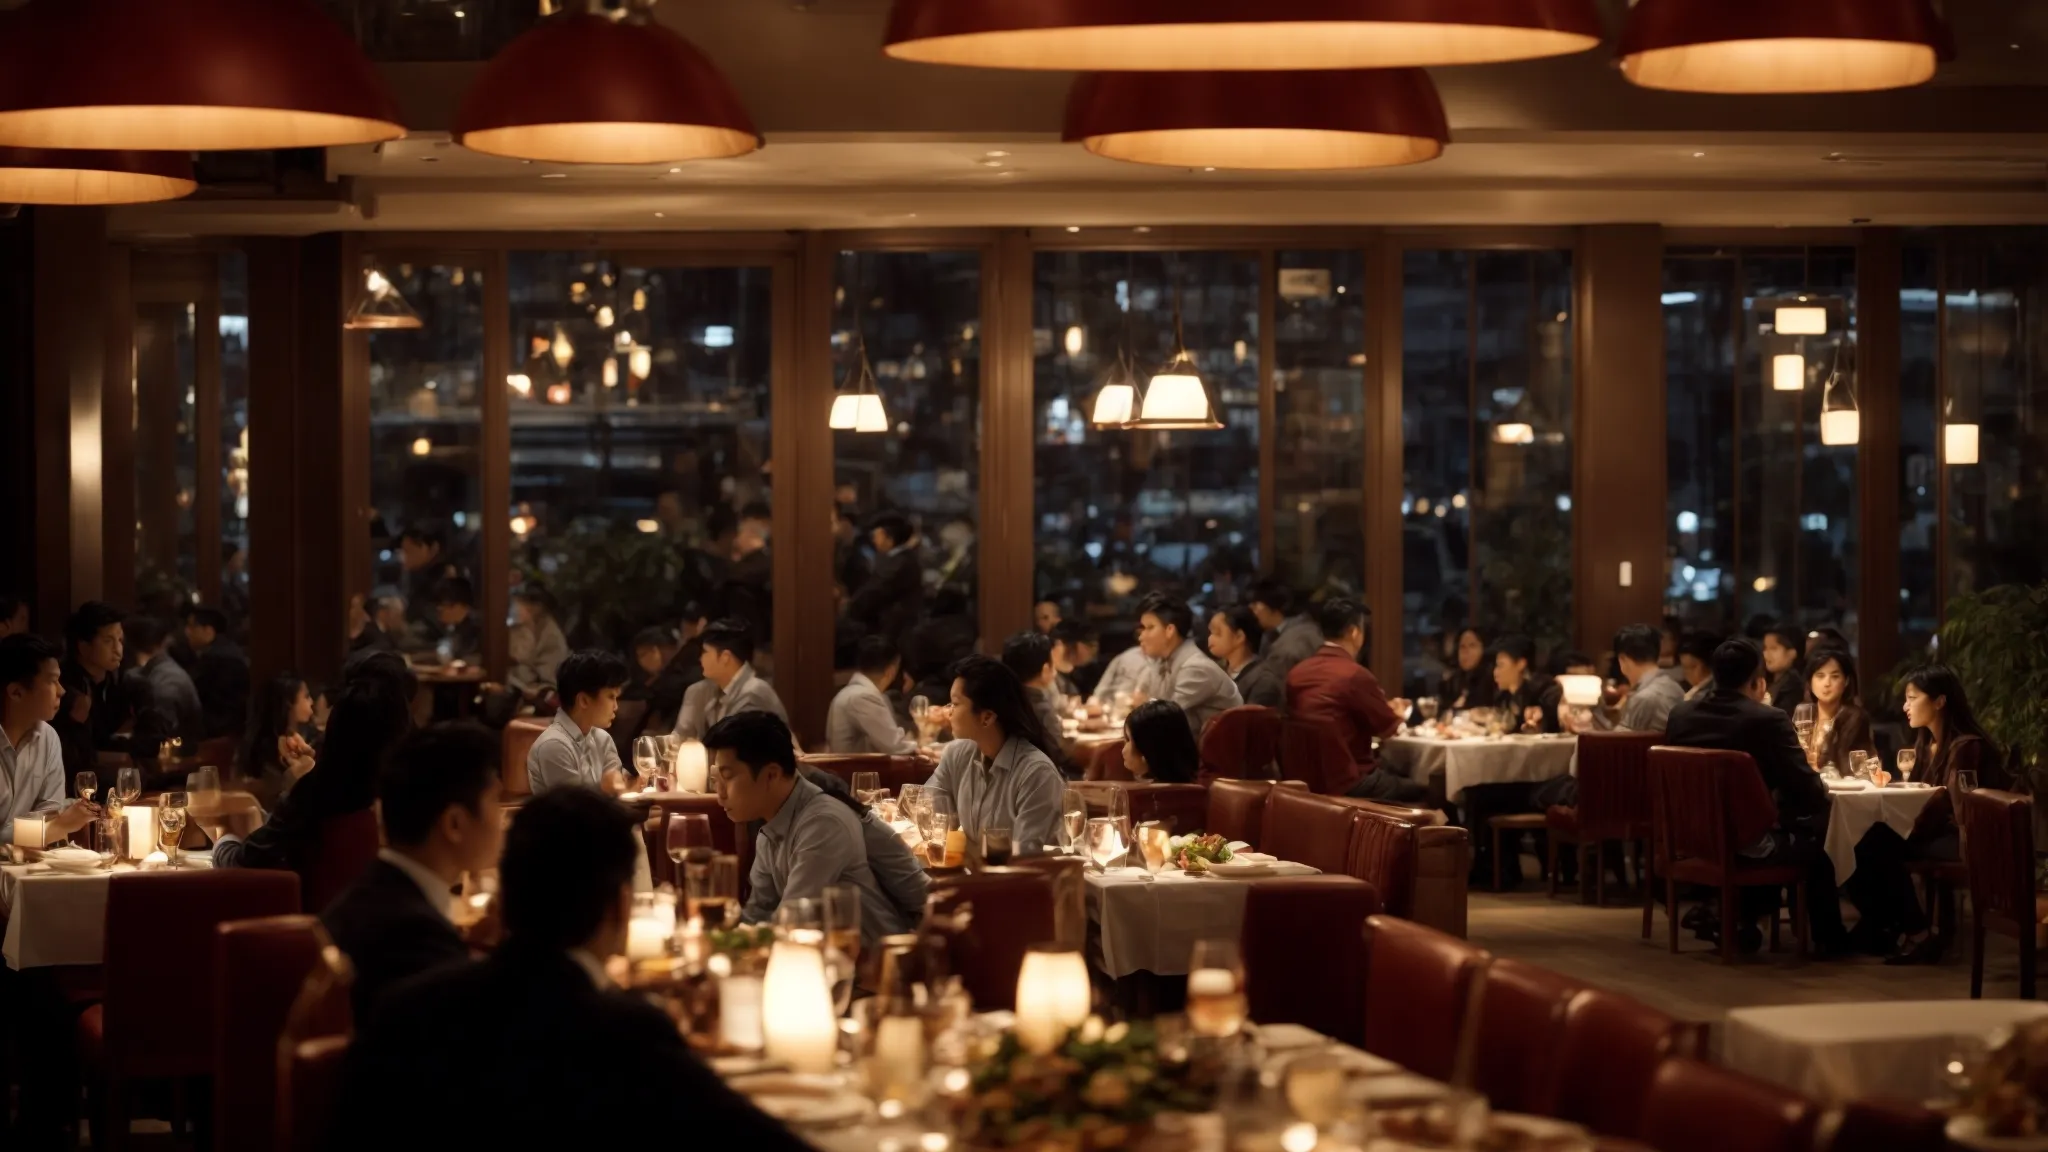 a bustling restaurant scene with patrons dining at well-set tables, illuminated by warm, inviting ambient lighting.